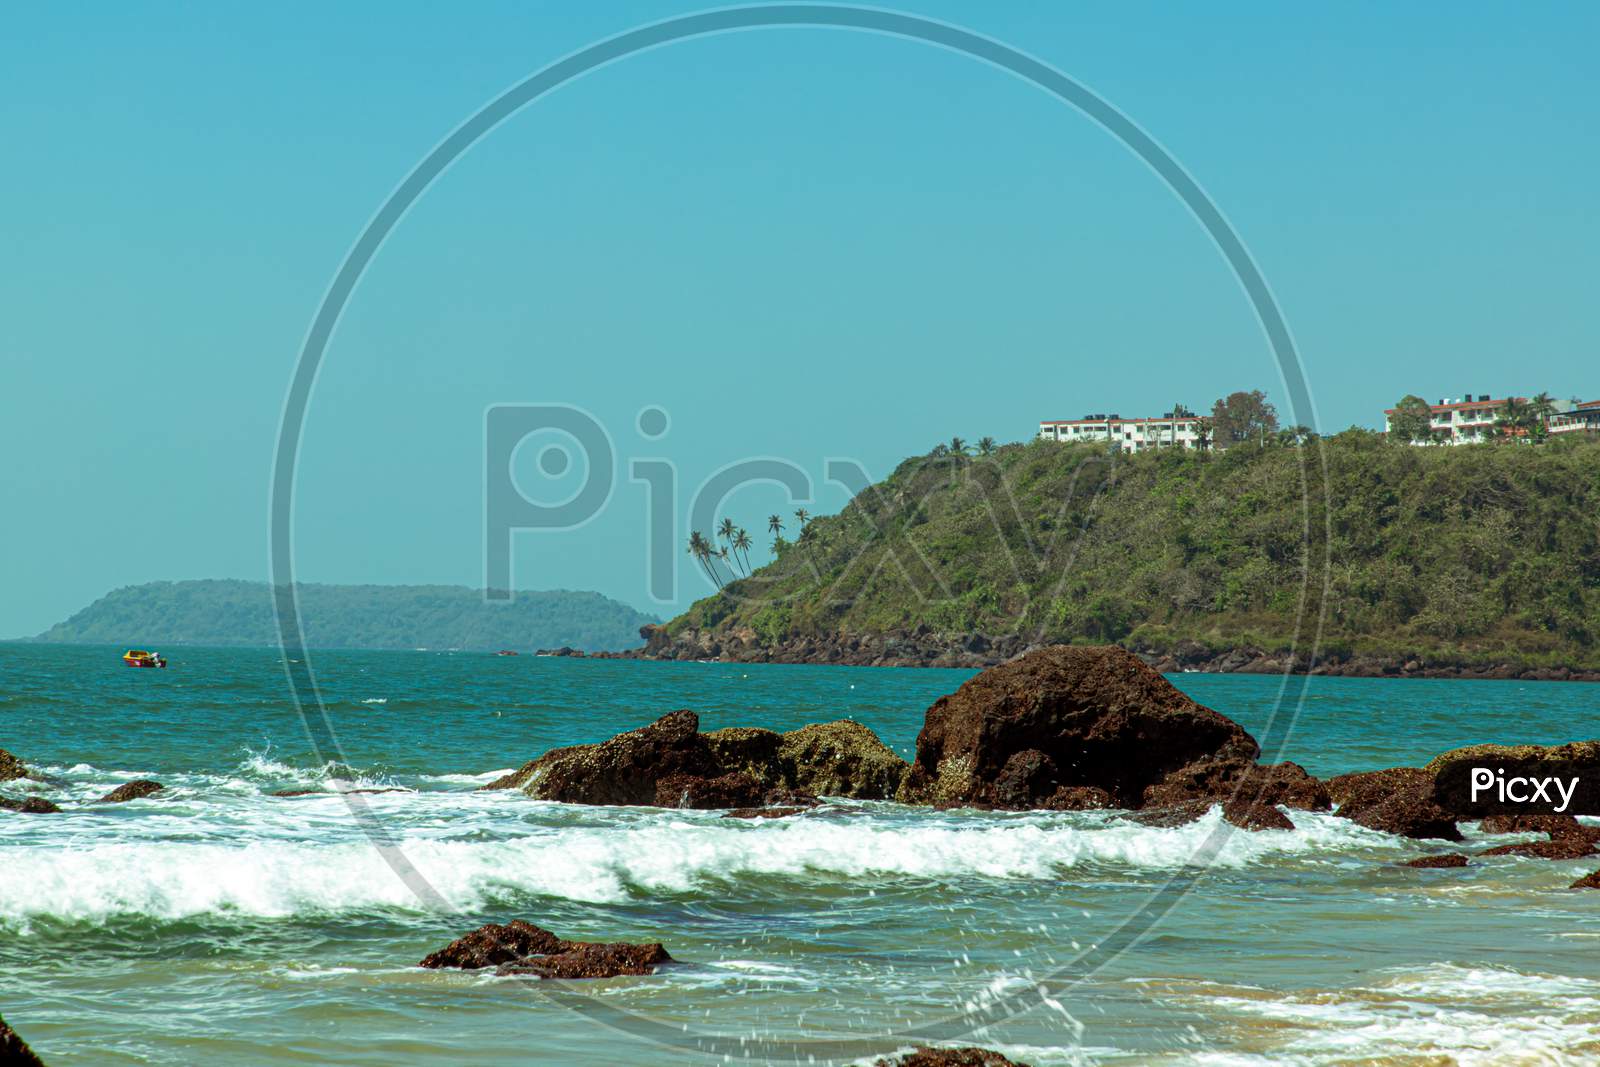 Landscape with ocean wave and rocks in goa india.